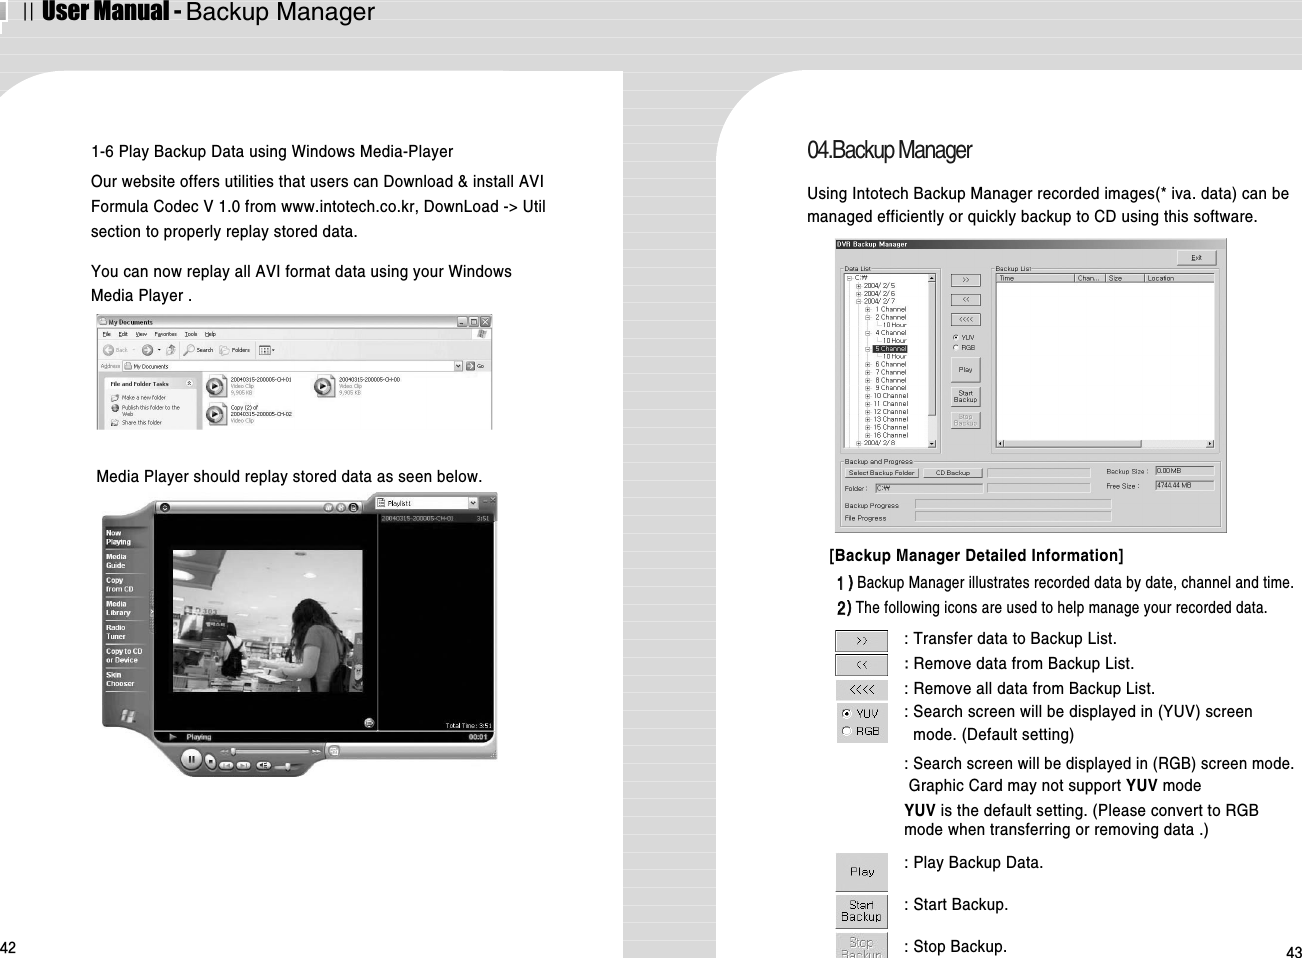 ⅡUser Manual - Backup Manager42 431-6 Play Backup Data using Windows Media-PlayerOur website offers utilities that users can Download &amp; install AVIFormula Codec V 1.0 from www.intotech.co.kr, DownLoad -&gt; Utilsection to properly replay stored data.You can now replay all AVI format data using your WindowsMedia Player .Media Player should replay stored data as seen below.04.Backup ManagerUsing Intotech Backup Manager recorded images(* iva. data) can bemanaged efficiently or quickly backup to CD using this software.[Backup Manager Detailed Information]: Transfer data to Backup List.: Remove data from Backup List.: Remove all data from Backup List.: Search screen will be displayed in (YUV) screenmode. (Default setting)  : Search screen will be displayed in (RGB) screen mode.Graphic Card may not support YUV mode YUV is the default setting. (Please convert to RGBmode when transferring or removing data .) : Play Backup Data. : Start Backup.: Stop Backup.11 )) Backup Manager illustrates recorded data by date, channel and time. 22))The following icons are used to help manage your recorded data.